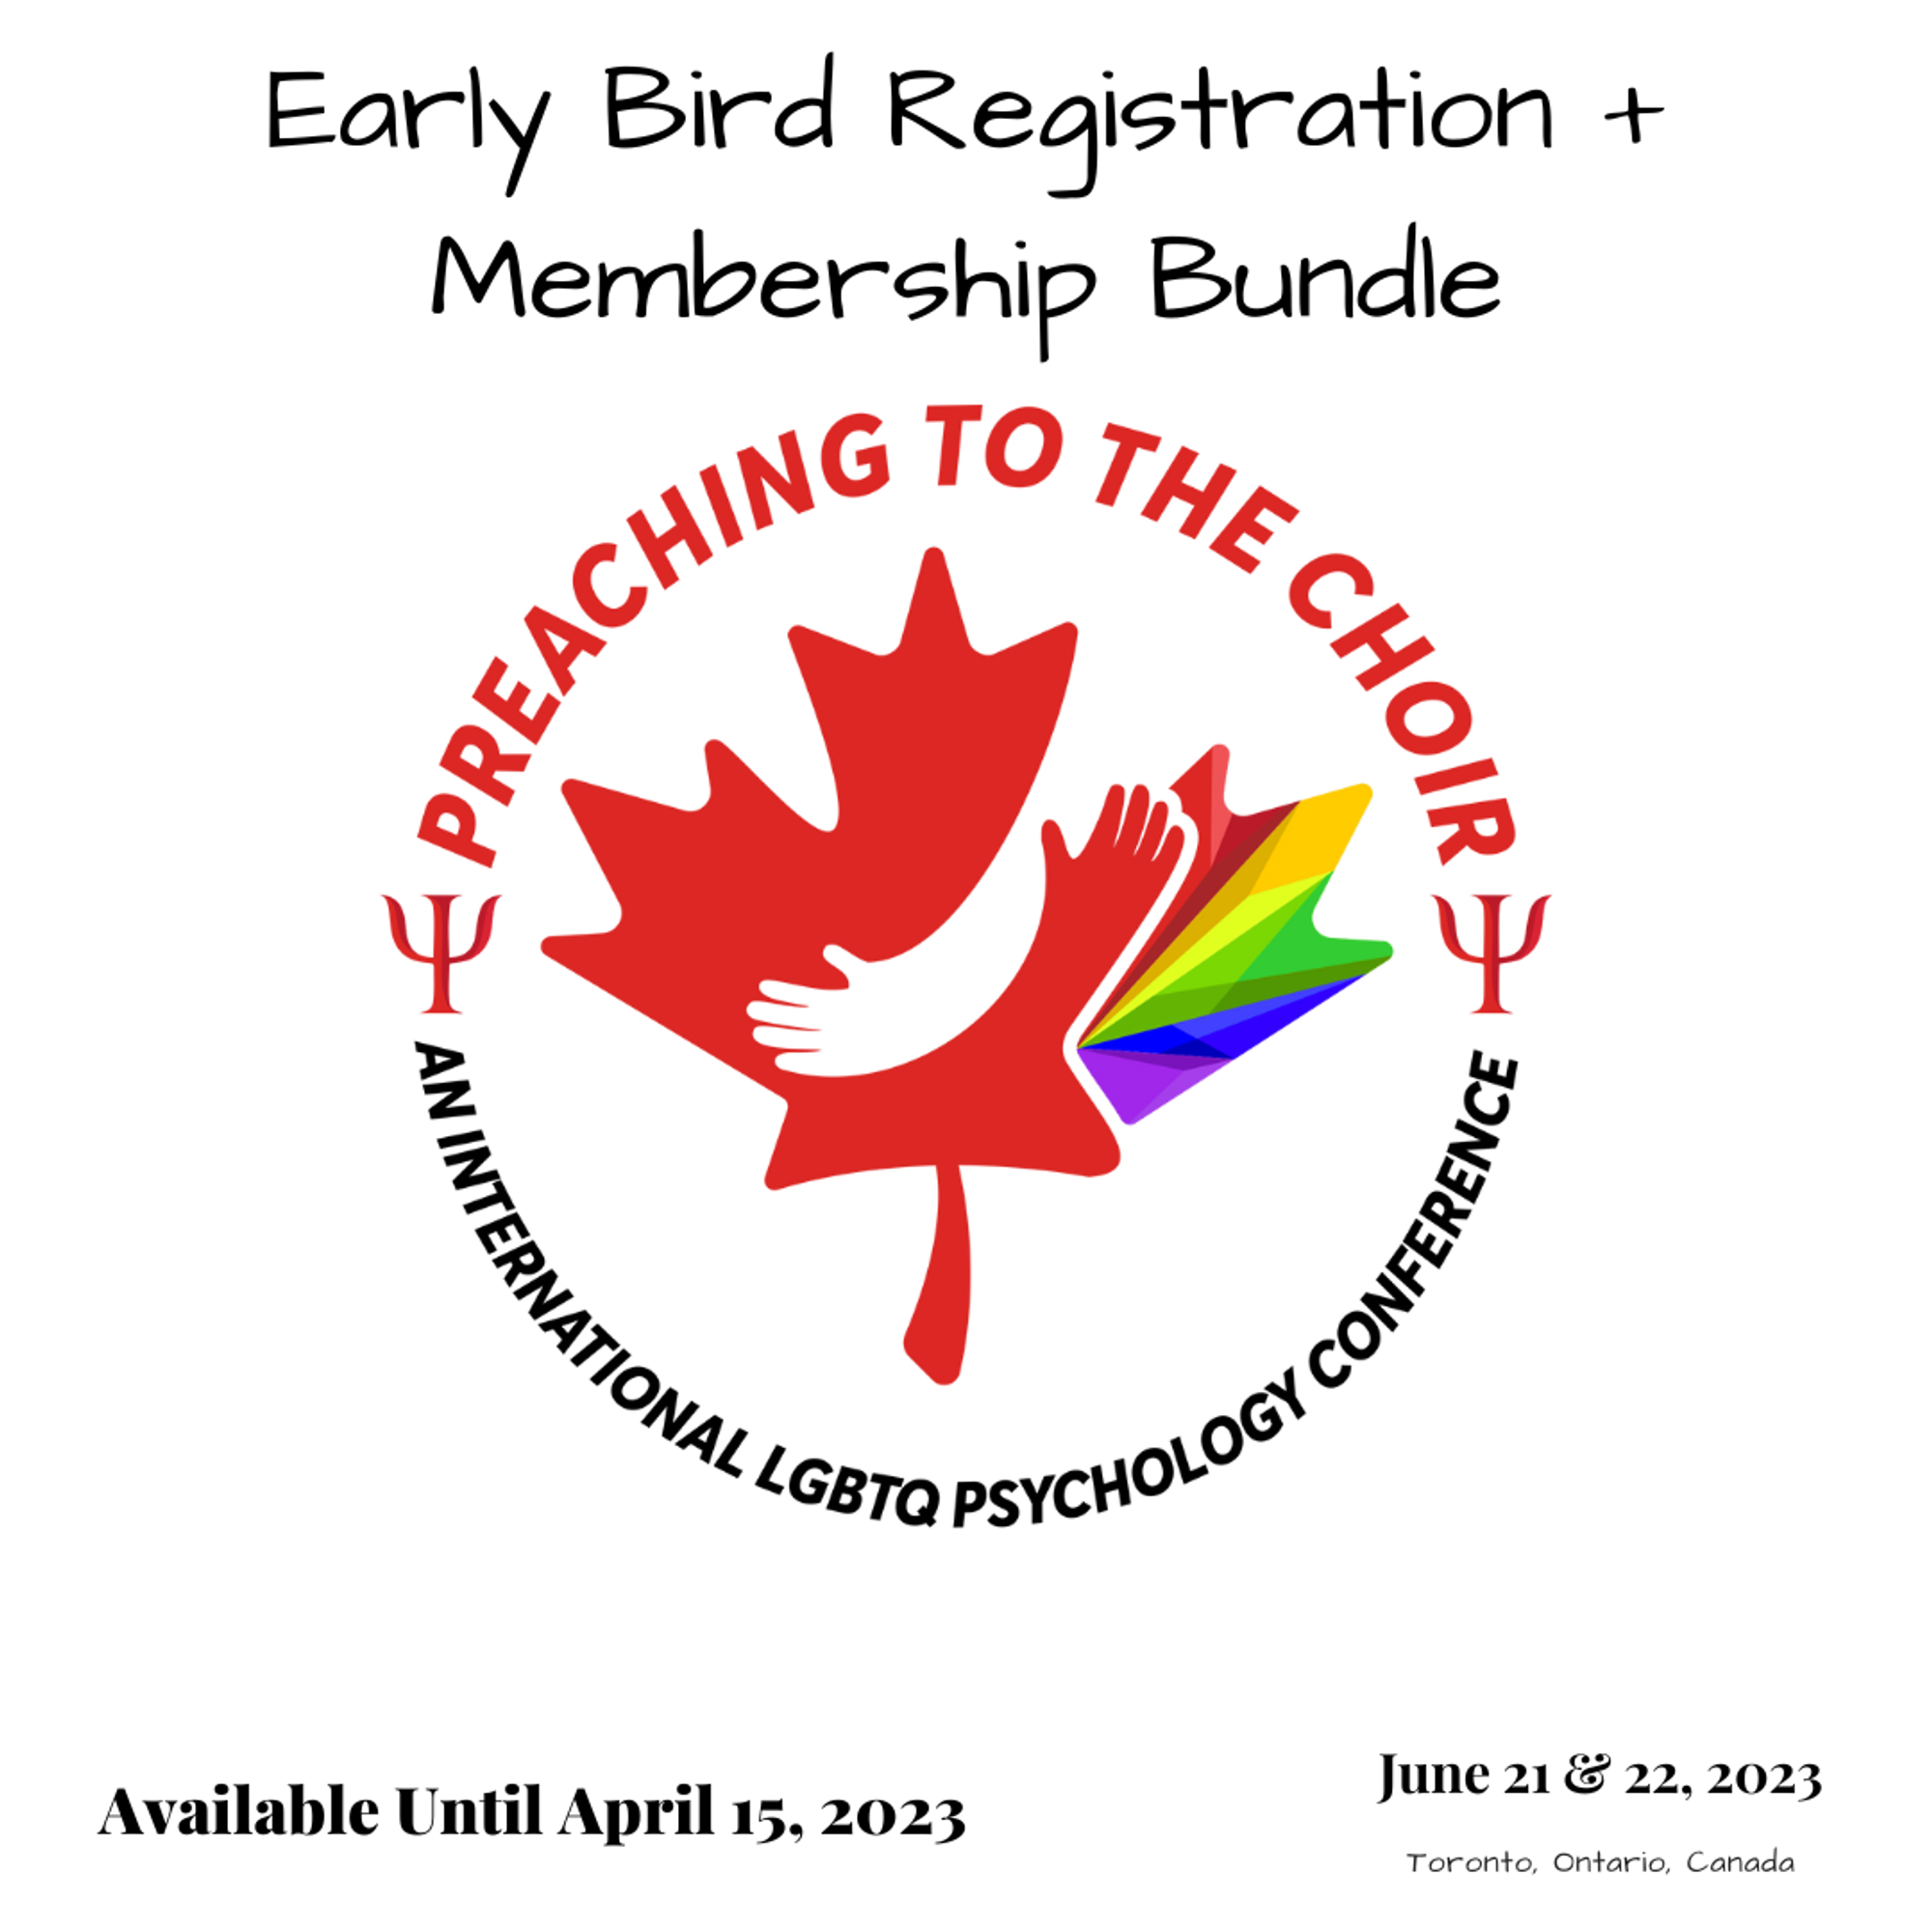 Click Here to purchase your registration and membership together at the Early Bird rates. 